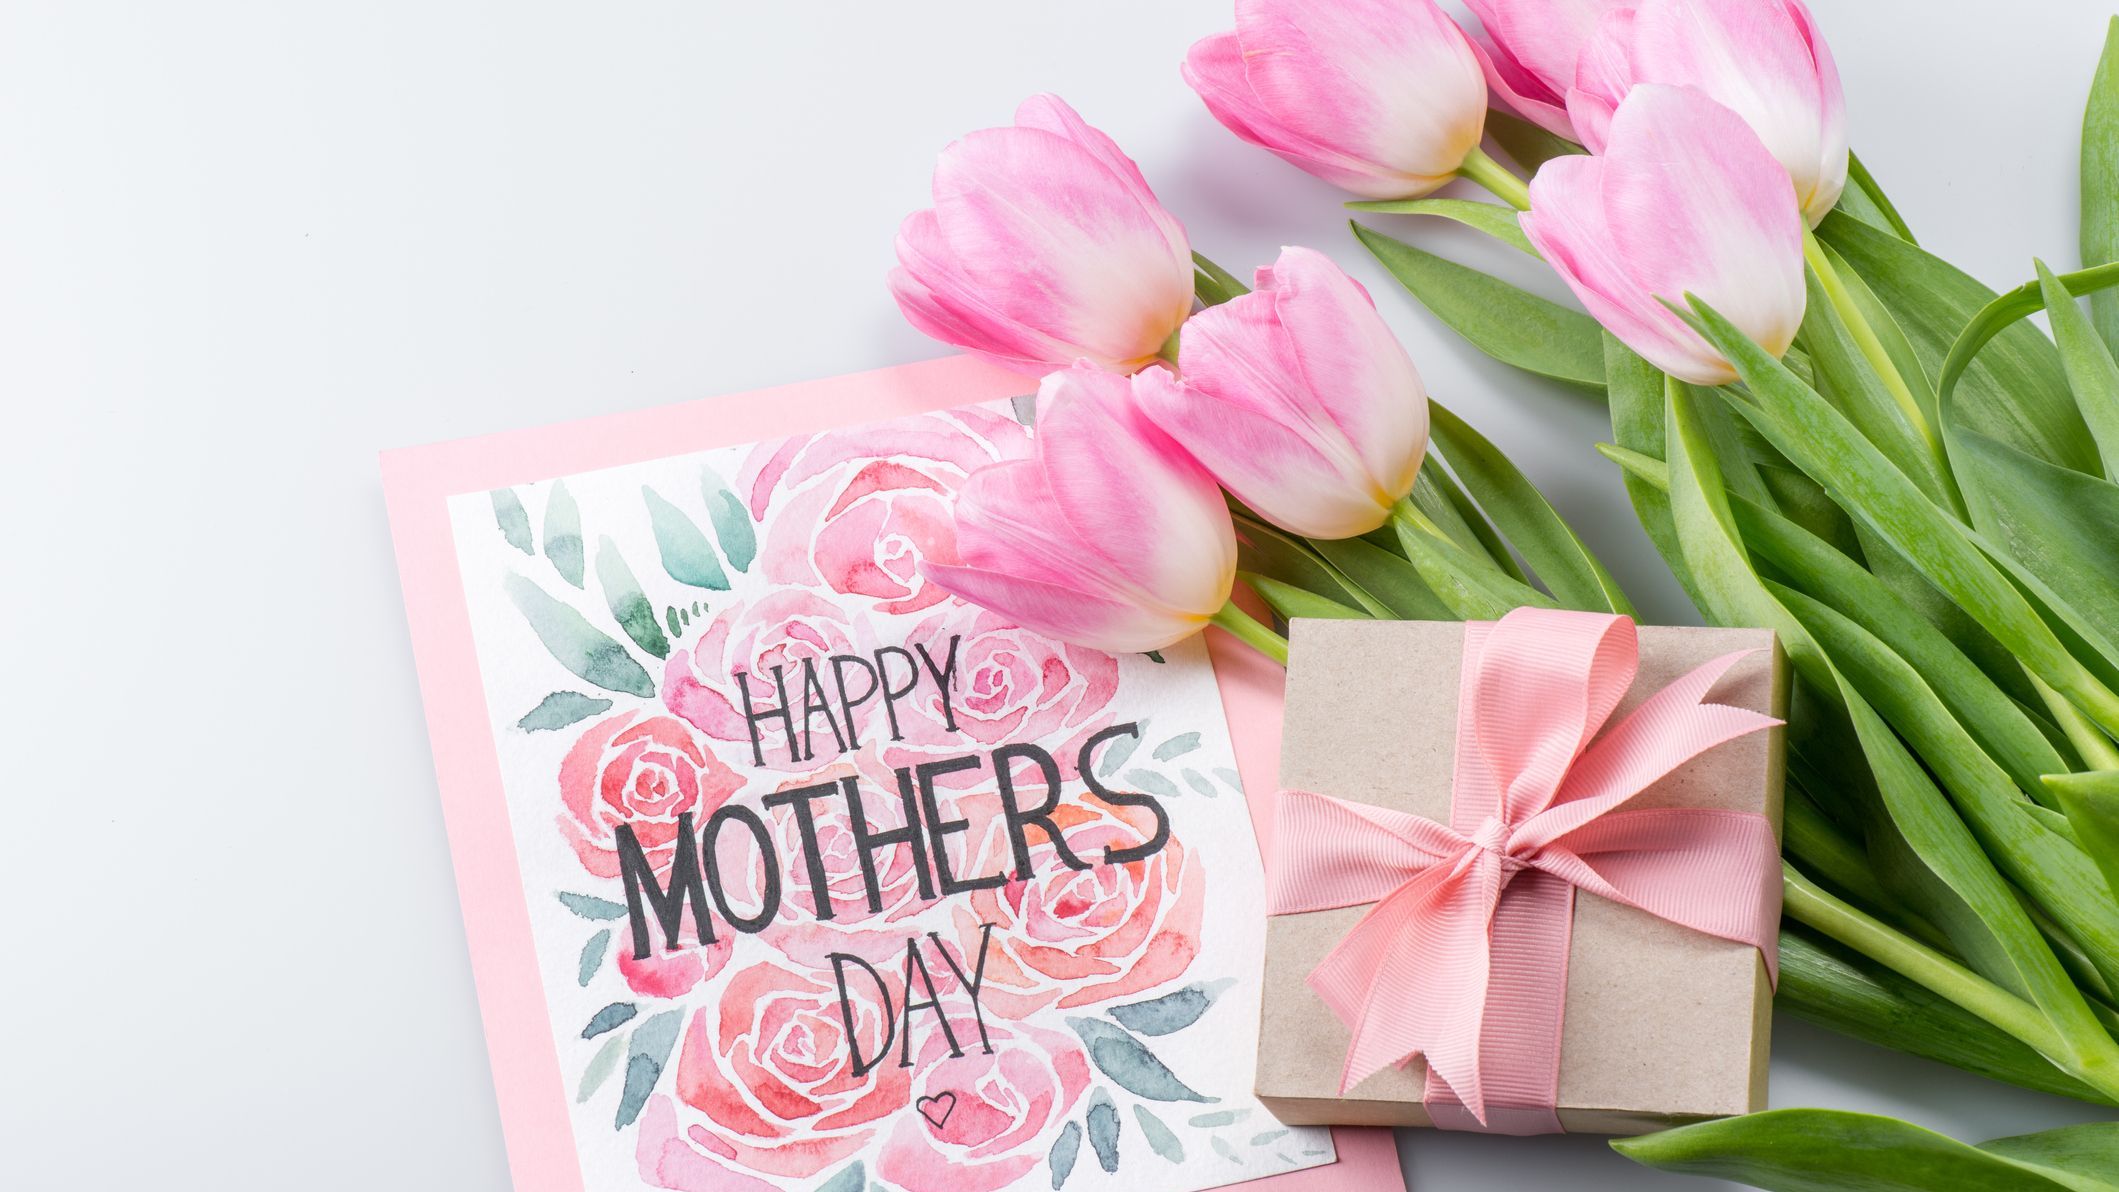 https://hips.hearstapps.com/hmg-prod/images/what-to-write-in-a-mothers-day-card-1584543780.jpg?crop=1xw:0.8429543847241867xh;center,top